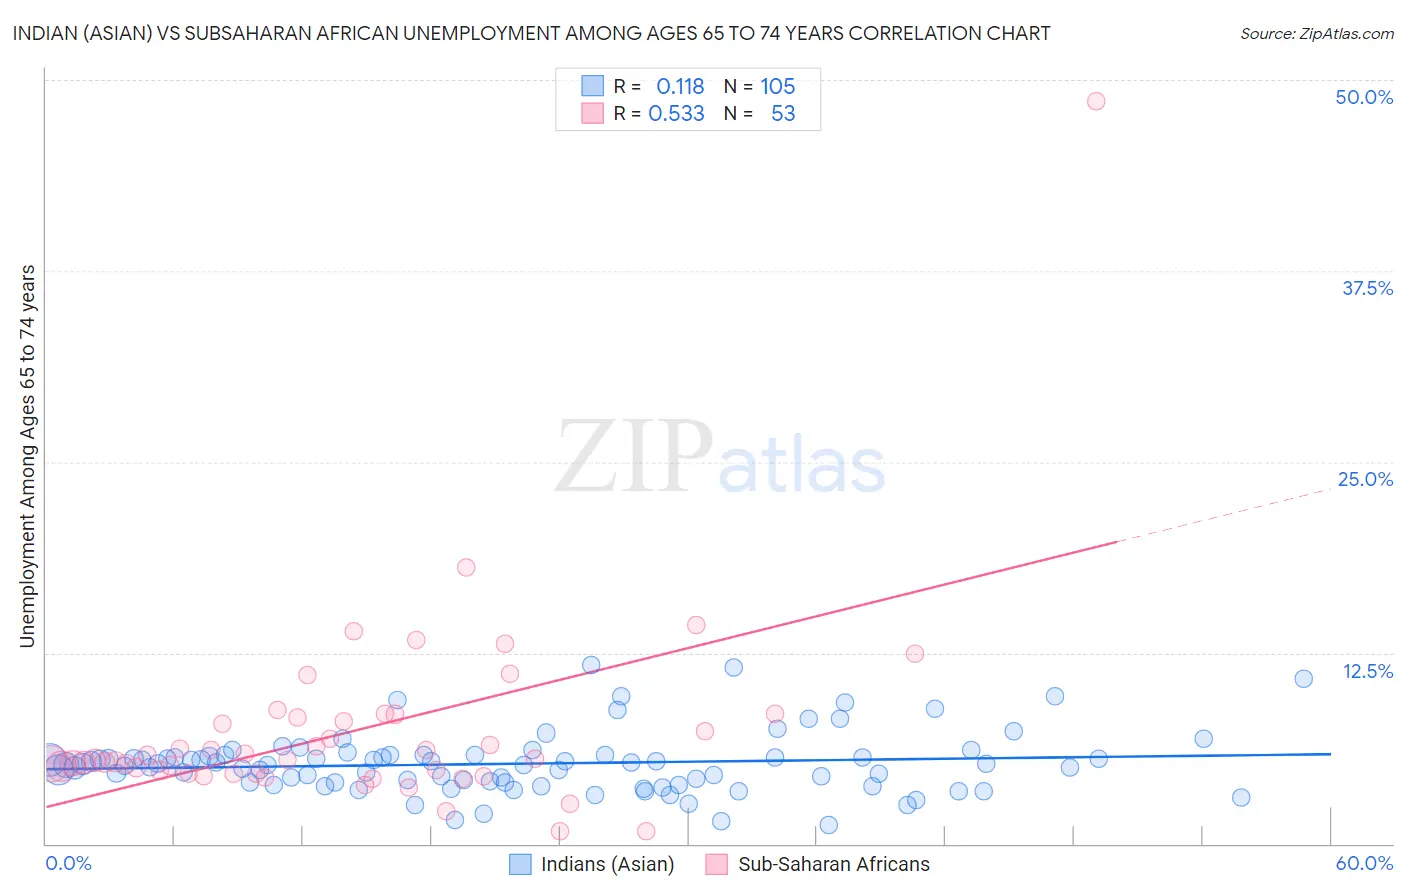 Indian (Asian) vs Subsaharan African Unemployment Among Ages 65 to 74 years